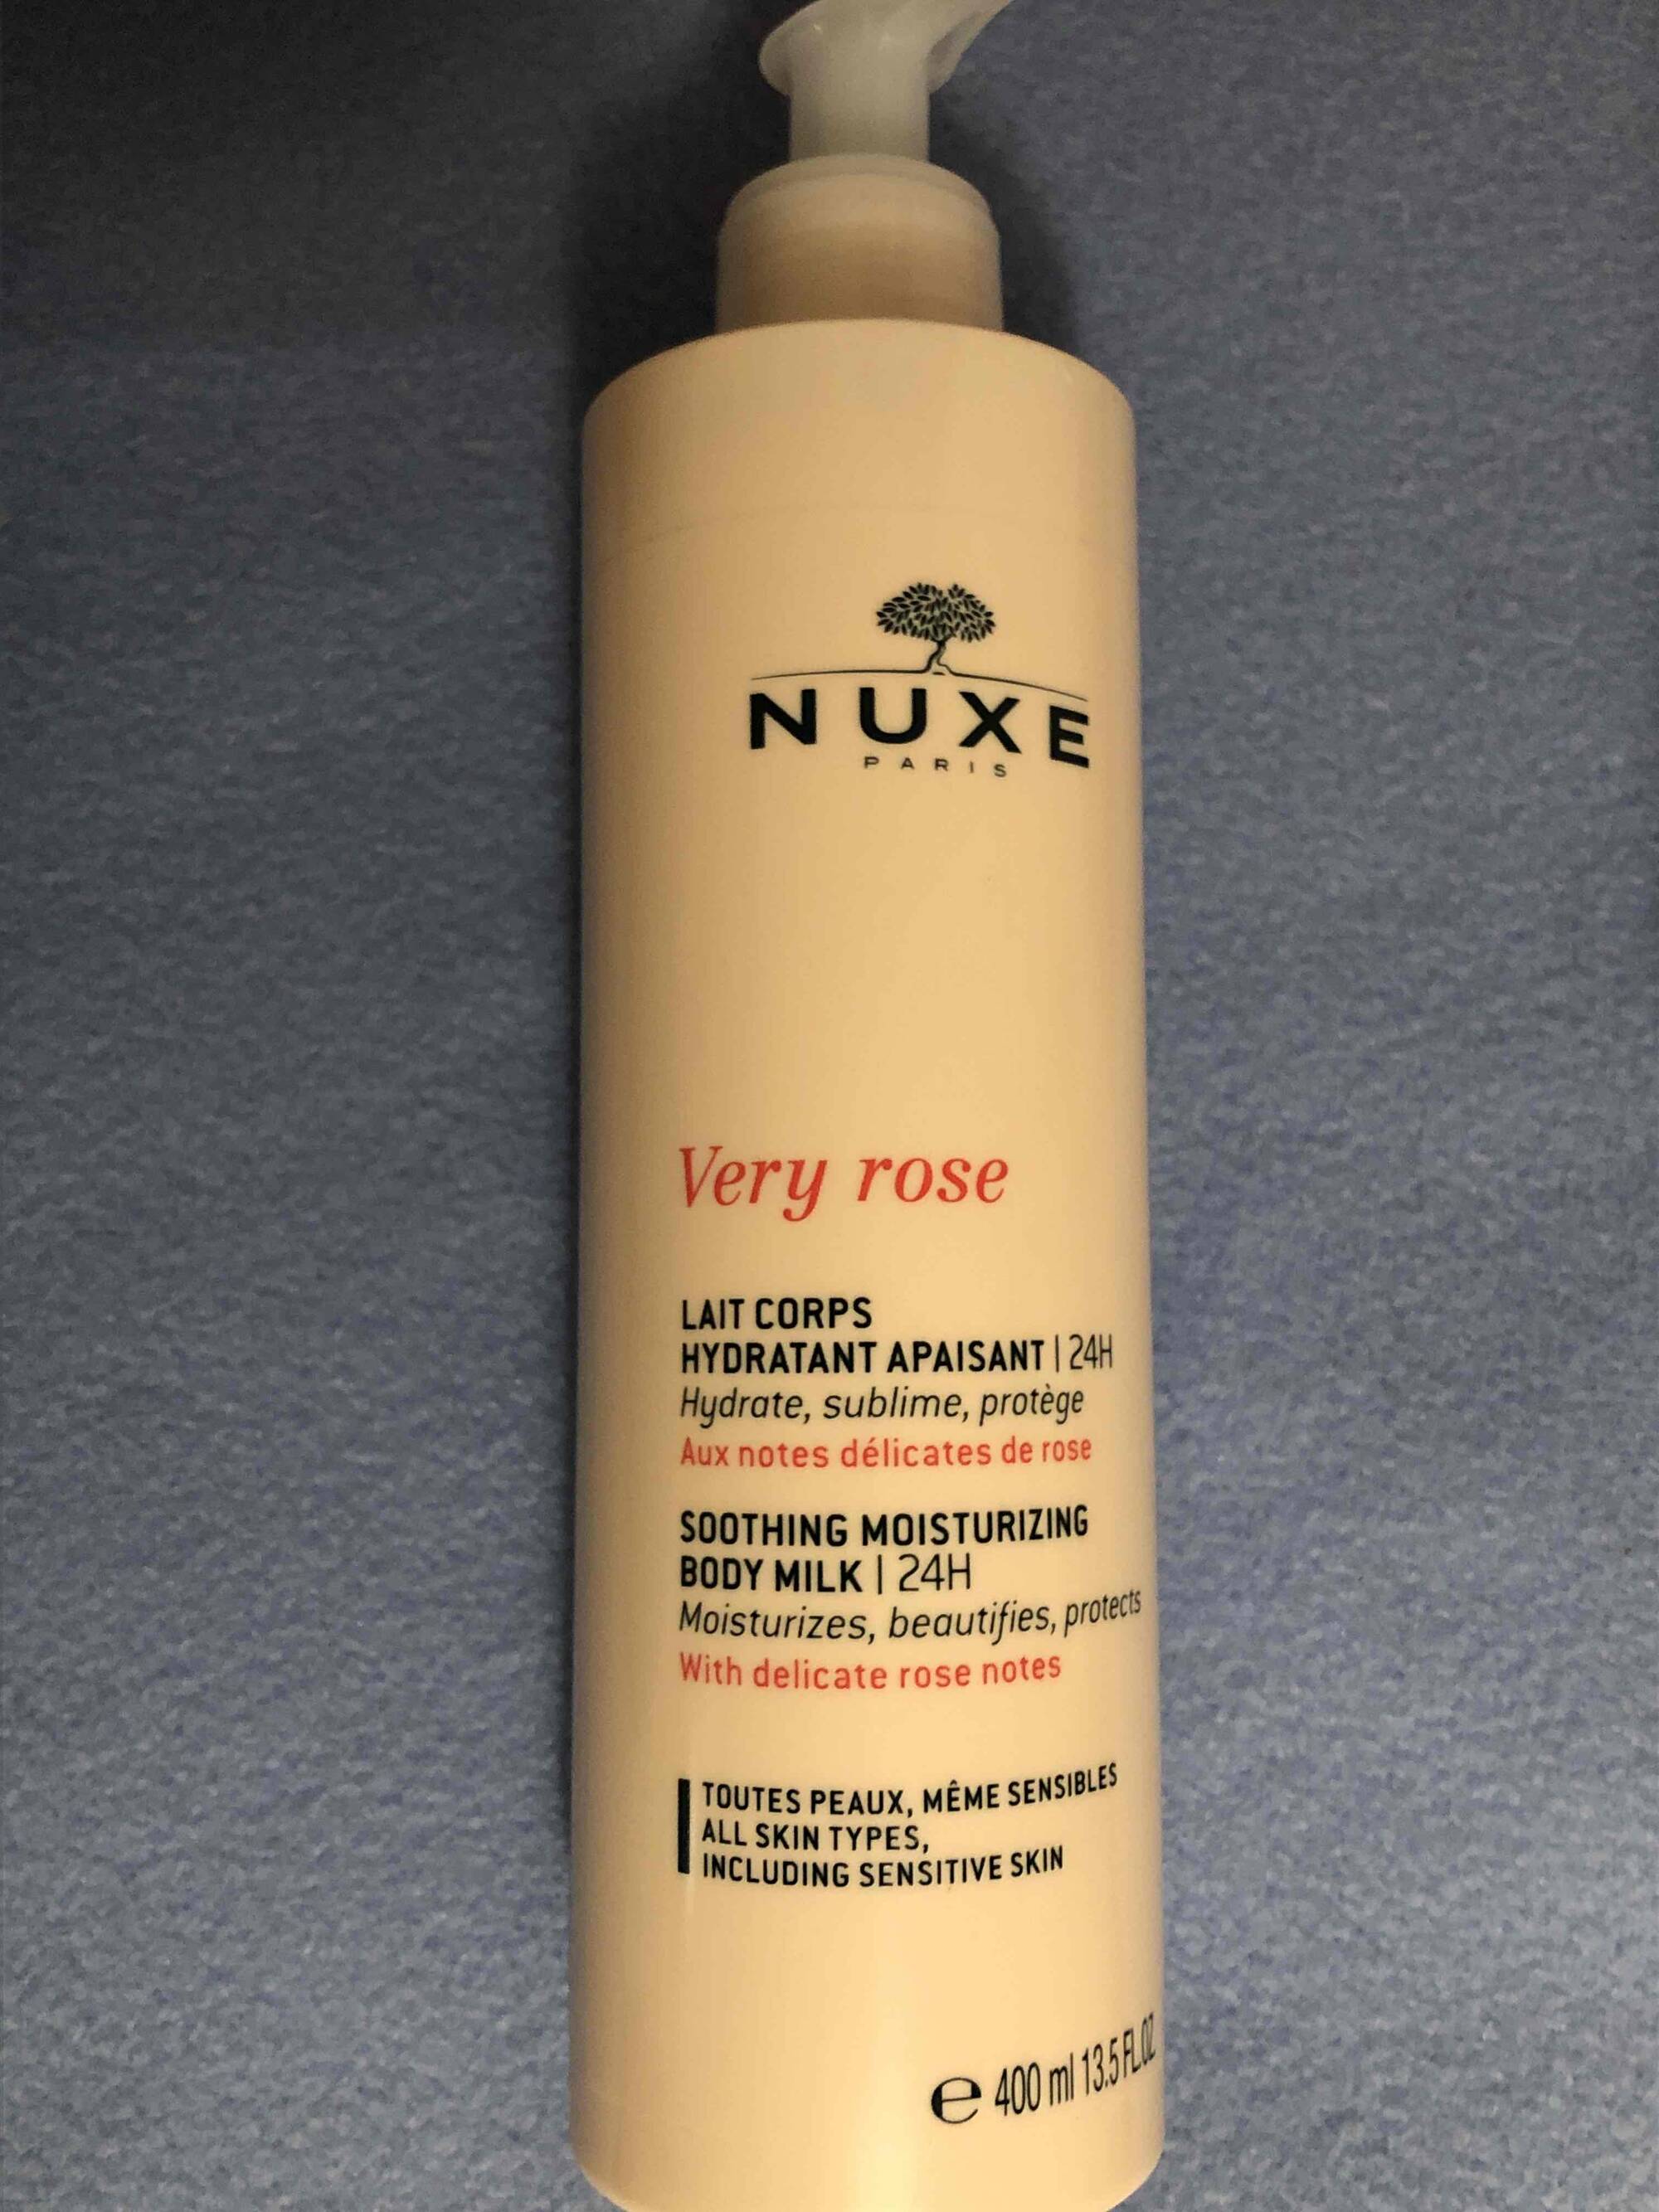 NUXE - Very rose - Lait corps hydratant apaisant 